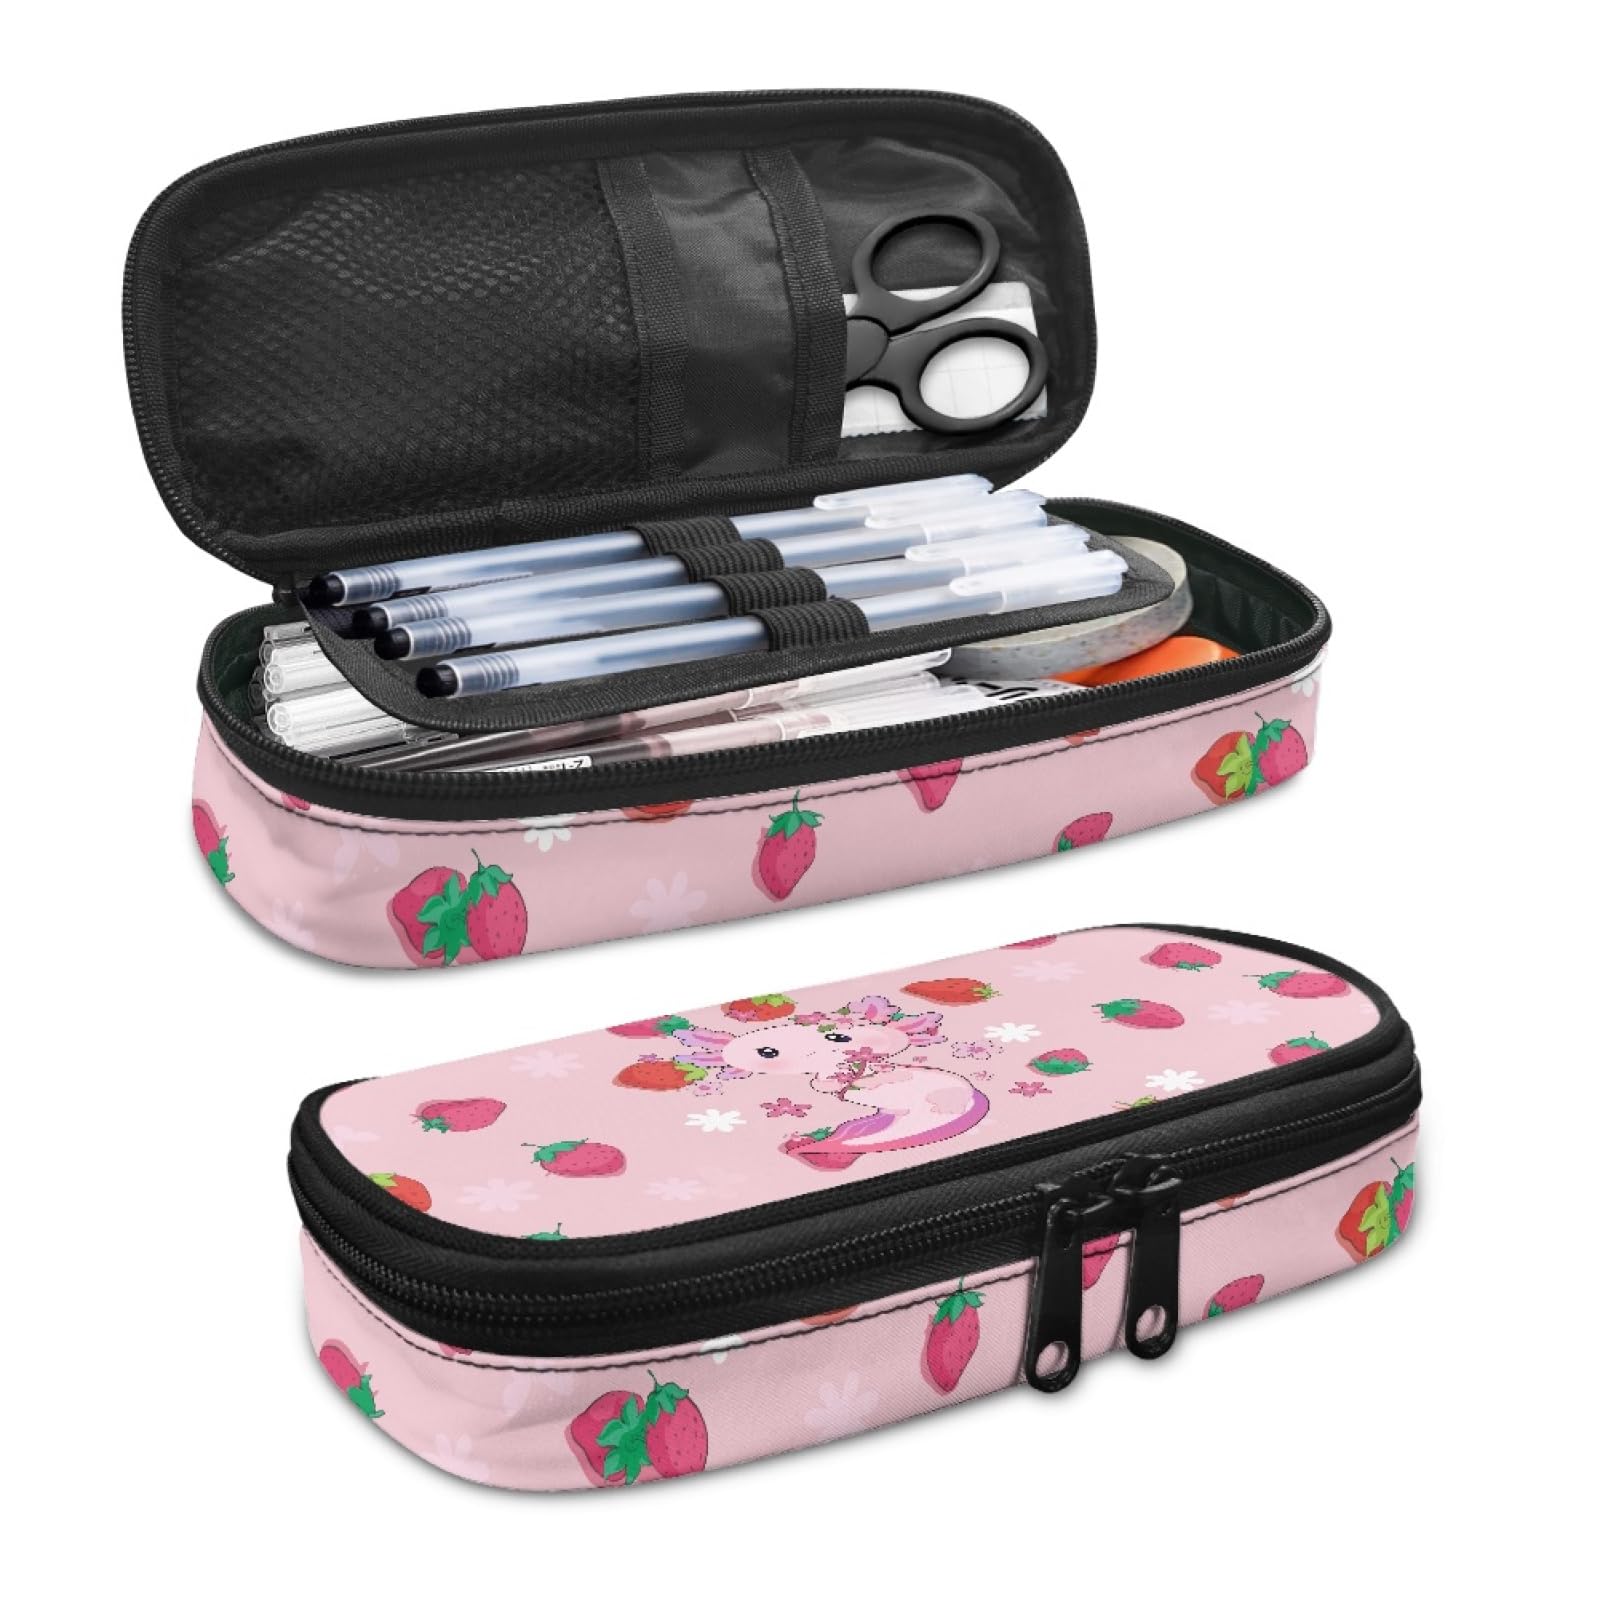 Drydeepin Pink Strawberry Axolotl Cute Print 4 Pcs School Set for Girls Backpack with Portable Lunch Box Pencil Bag Water Bottle Bag Kids Back to School Gifts Elementary School Student Book Bag